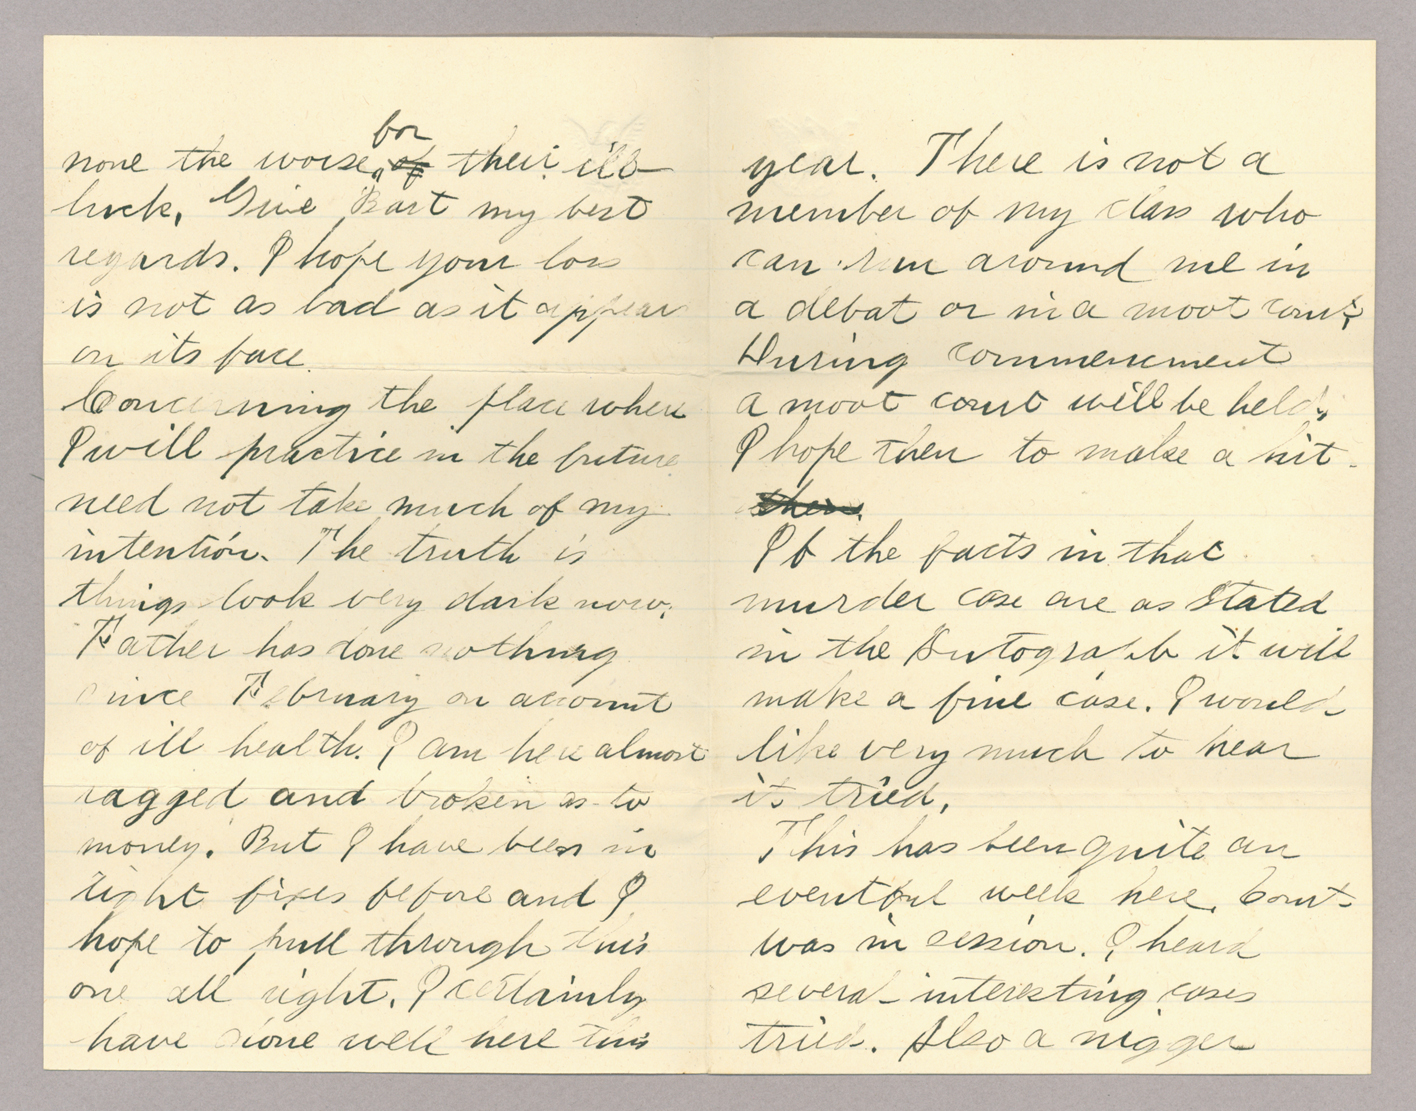 Letter. A. S. Heck, Carlisle, Pennsylvania, to "Prof. L[orenzo] D. Ripple," Costello, Pennsylvania, Pages 2-3